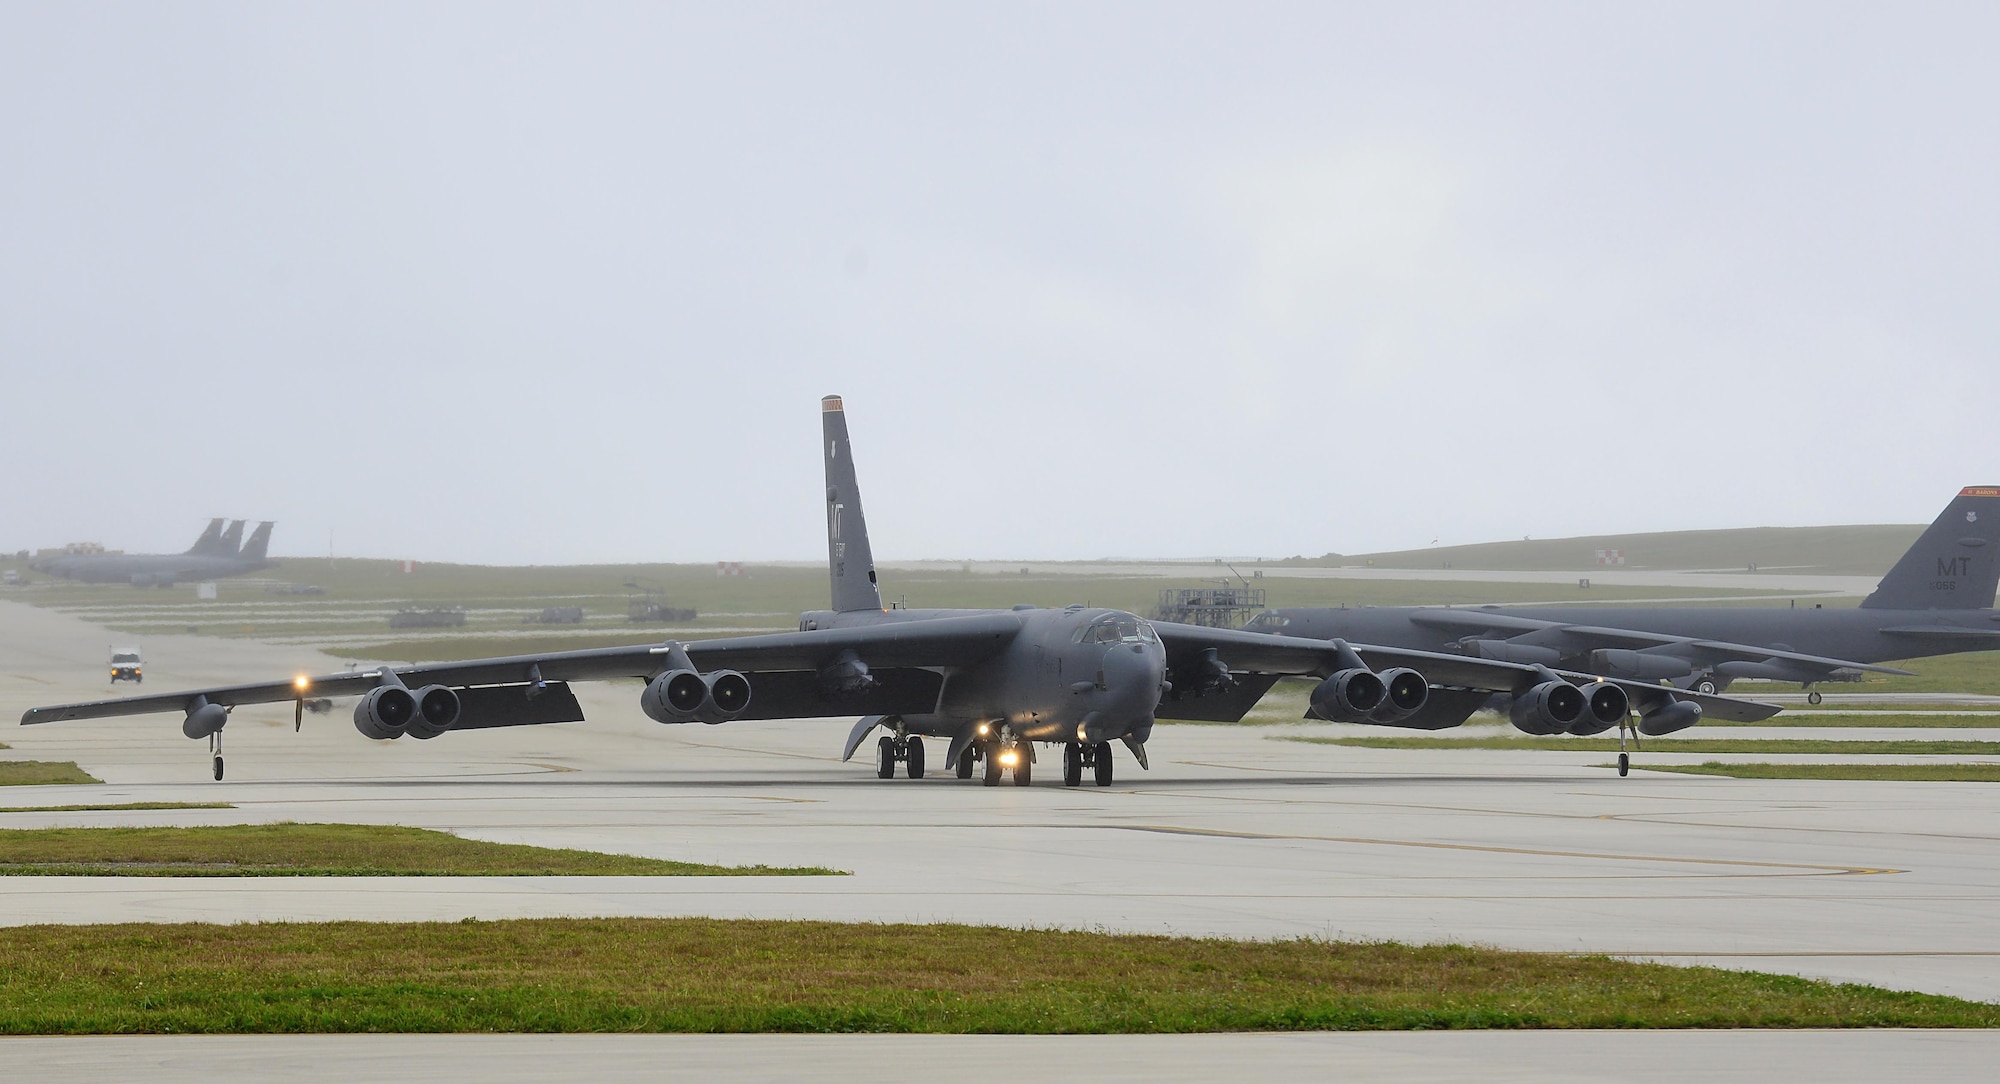 A  U.S. Air Force B-52 Stratofortress bomber taxis on the runway April 14, 2016, at Andersen Air Force Base, Guam. The U.S. military has maintained a deployed strategic bomber presence in the Pacific since March 2004, which has contributed significantly to regional security and stability. (U.S. Air Force photo by Airman 1st Class Arielle Vasquez/Released)